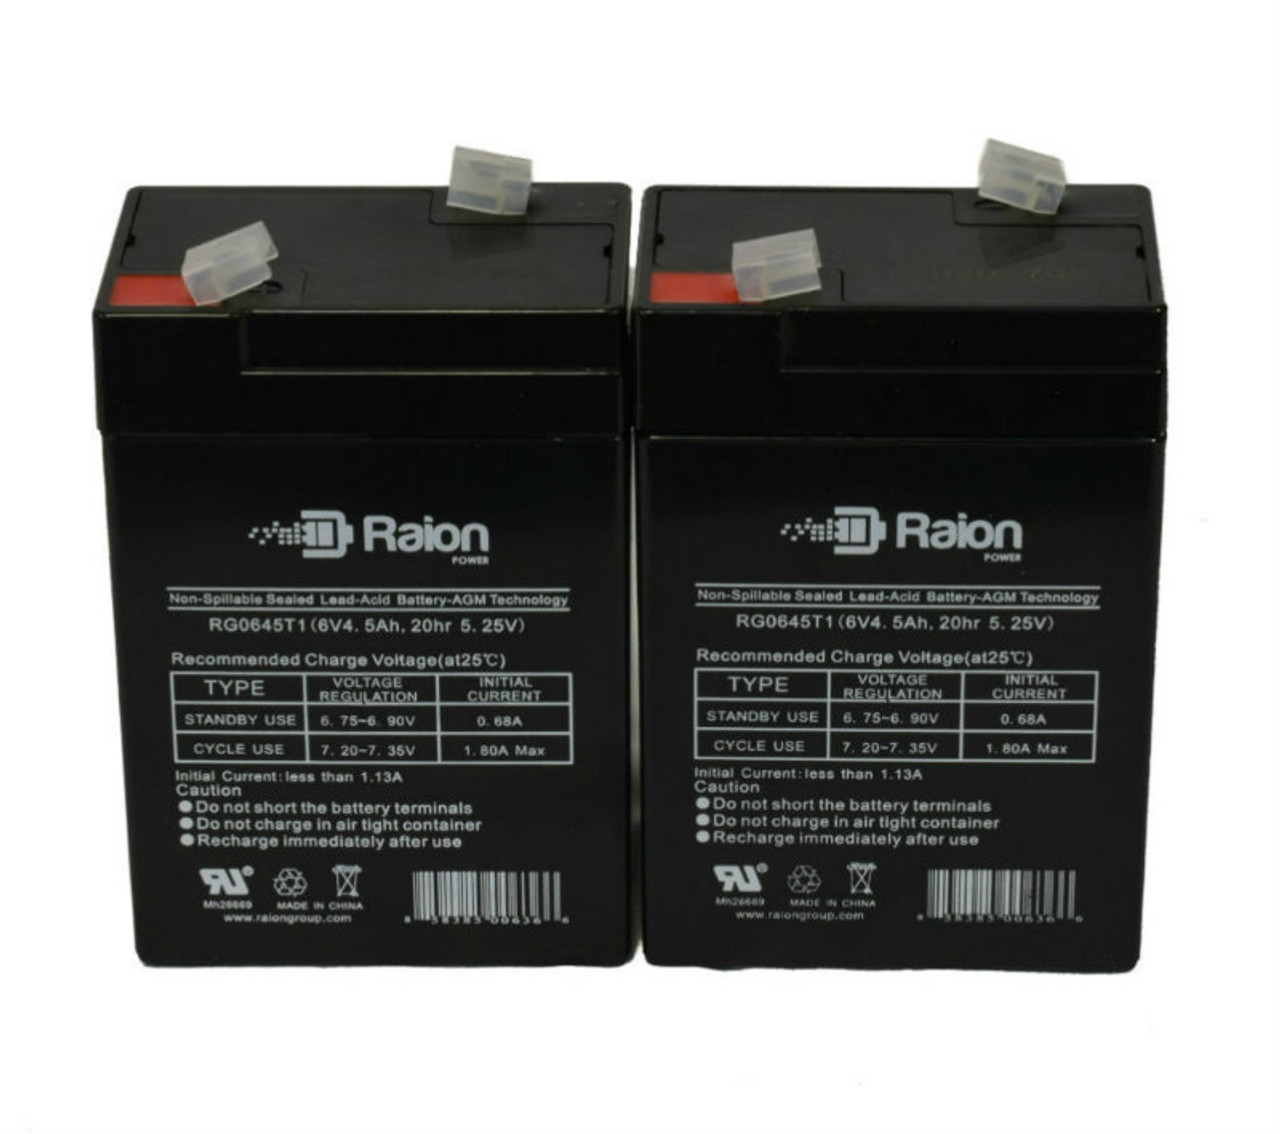 Raion Power 6V 4.5Ah Replacement Emergency Light Battery for Light Alarms RSQGD - 2 Pack